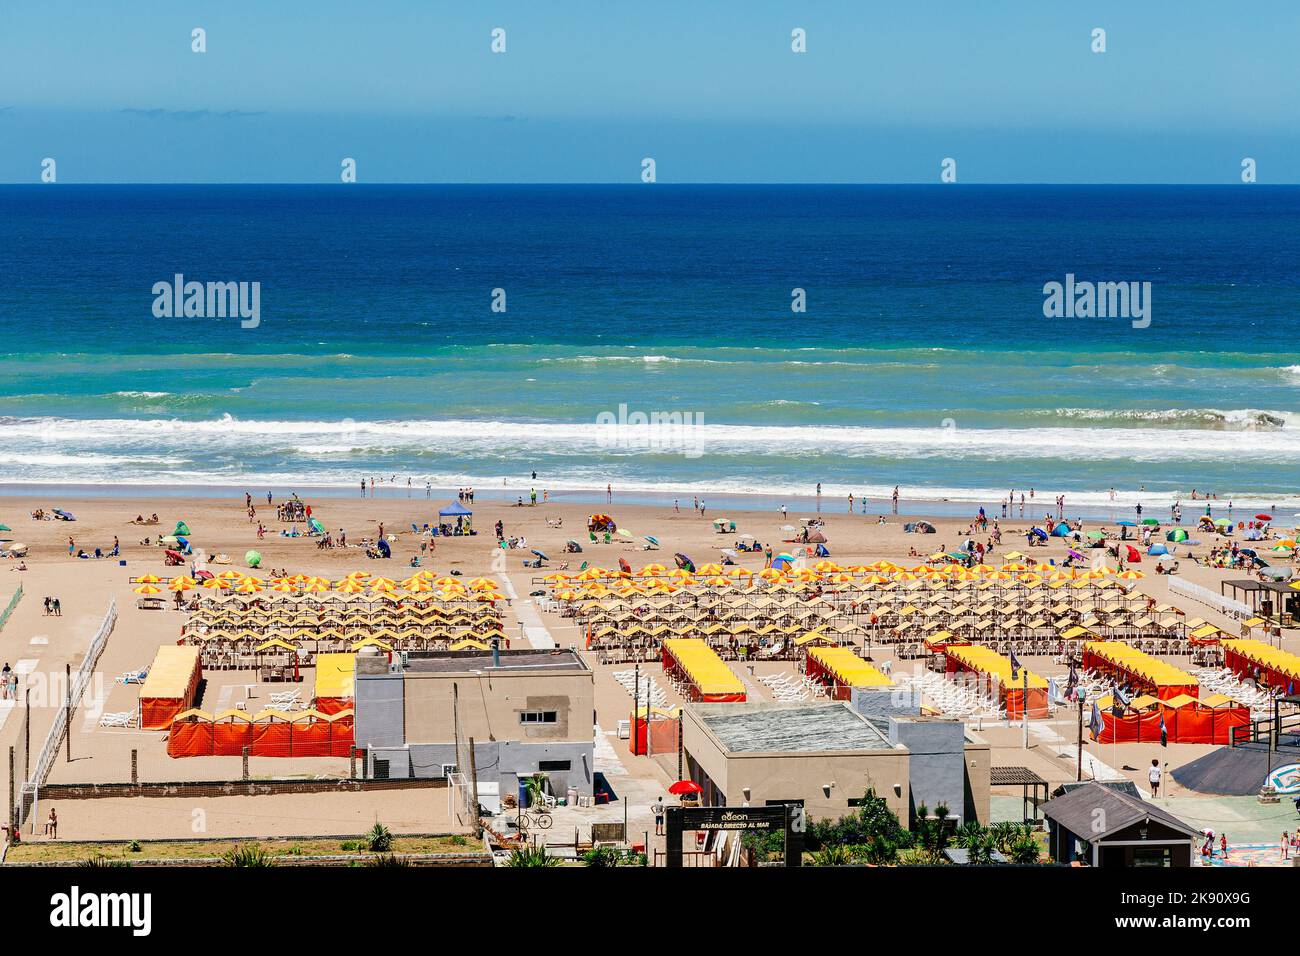 NECOCHEA, BUENOS AIRES, ARGENTINA - JANUARY 5, 2022: Aerial view of the main beach in the city downtown. Stock Photo